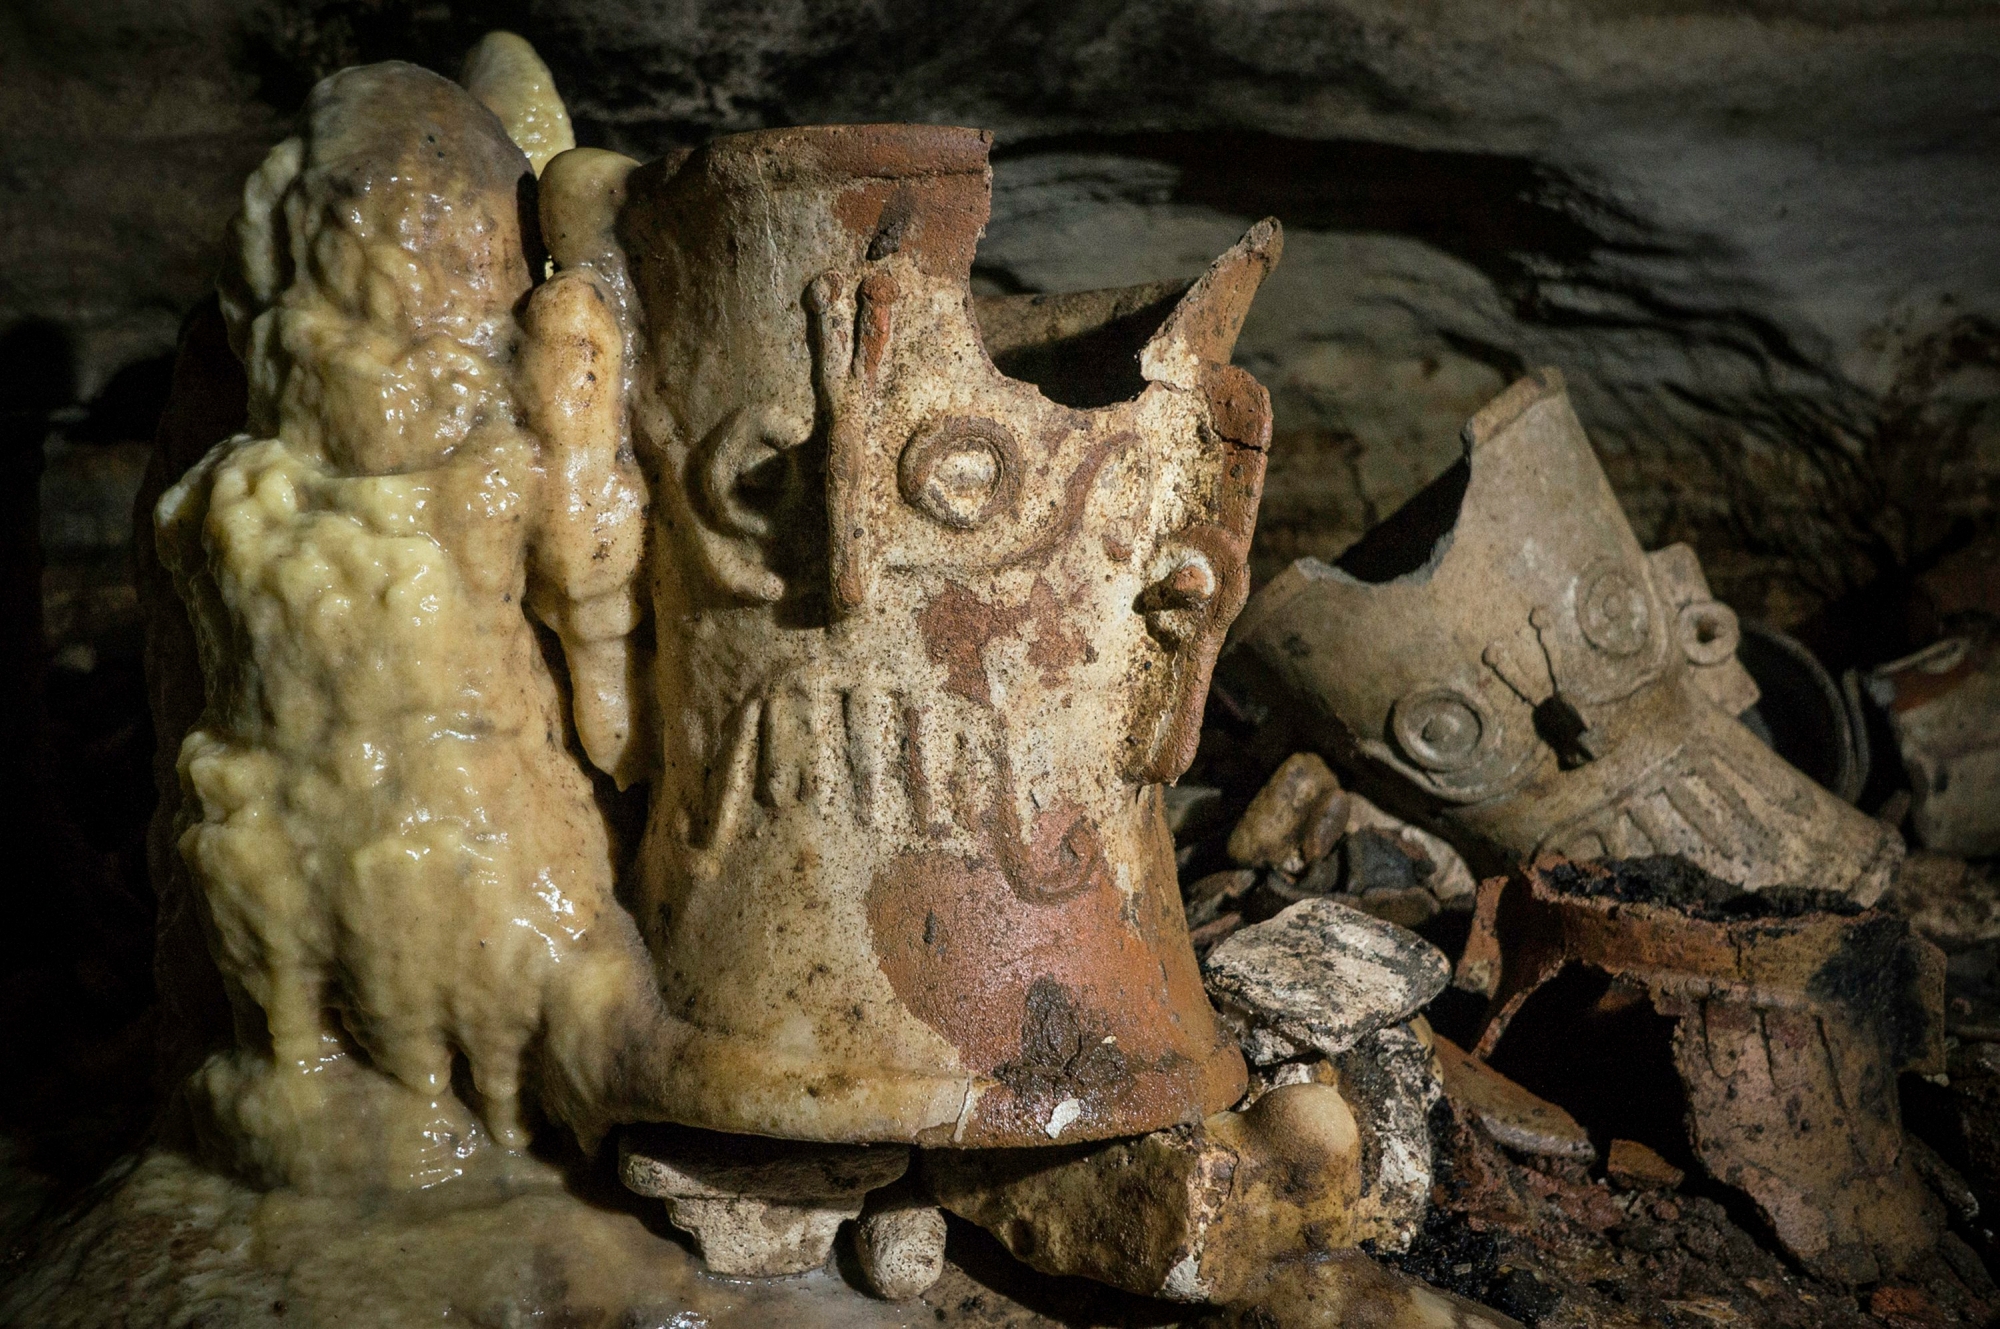 Pre-columbian artifacts sit in a cave at the Mayan ruins of Chichen Itza, Yucatan, Mexico, Tuesday, Feb. 19, 2019. Mexican archaeologists say they have found a cave at the Mayan ruins of Chichen Itza with offerings of about 200 ceramic vessels in nearly untouched condition. The National Institute of Anthropology and History says the vessels appear to date back to around 1,000 A.D. (Karla Ortega/Mexico's National Institute of Anthropology and History via AP) Mexico Archaeology